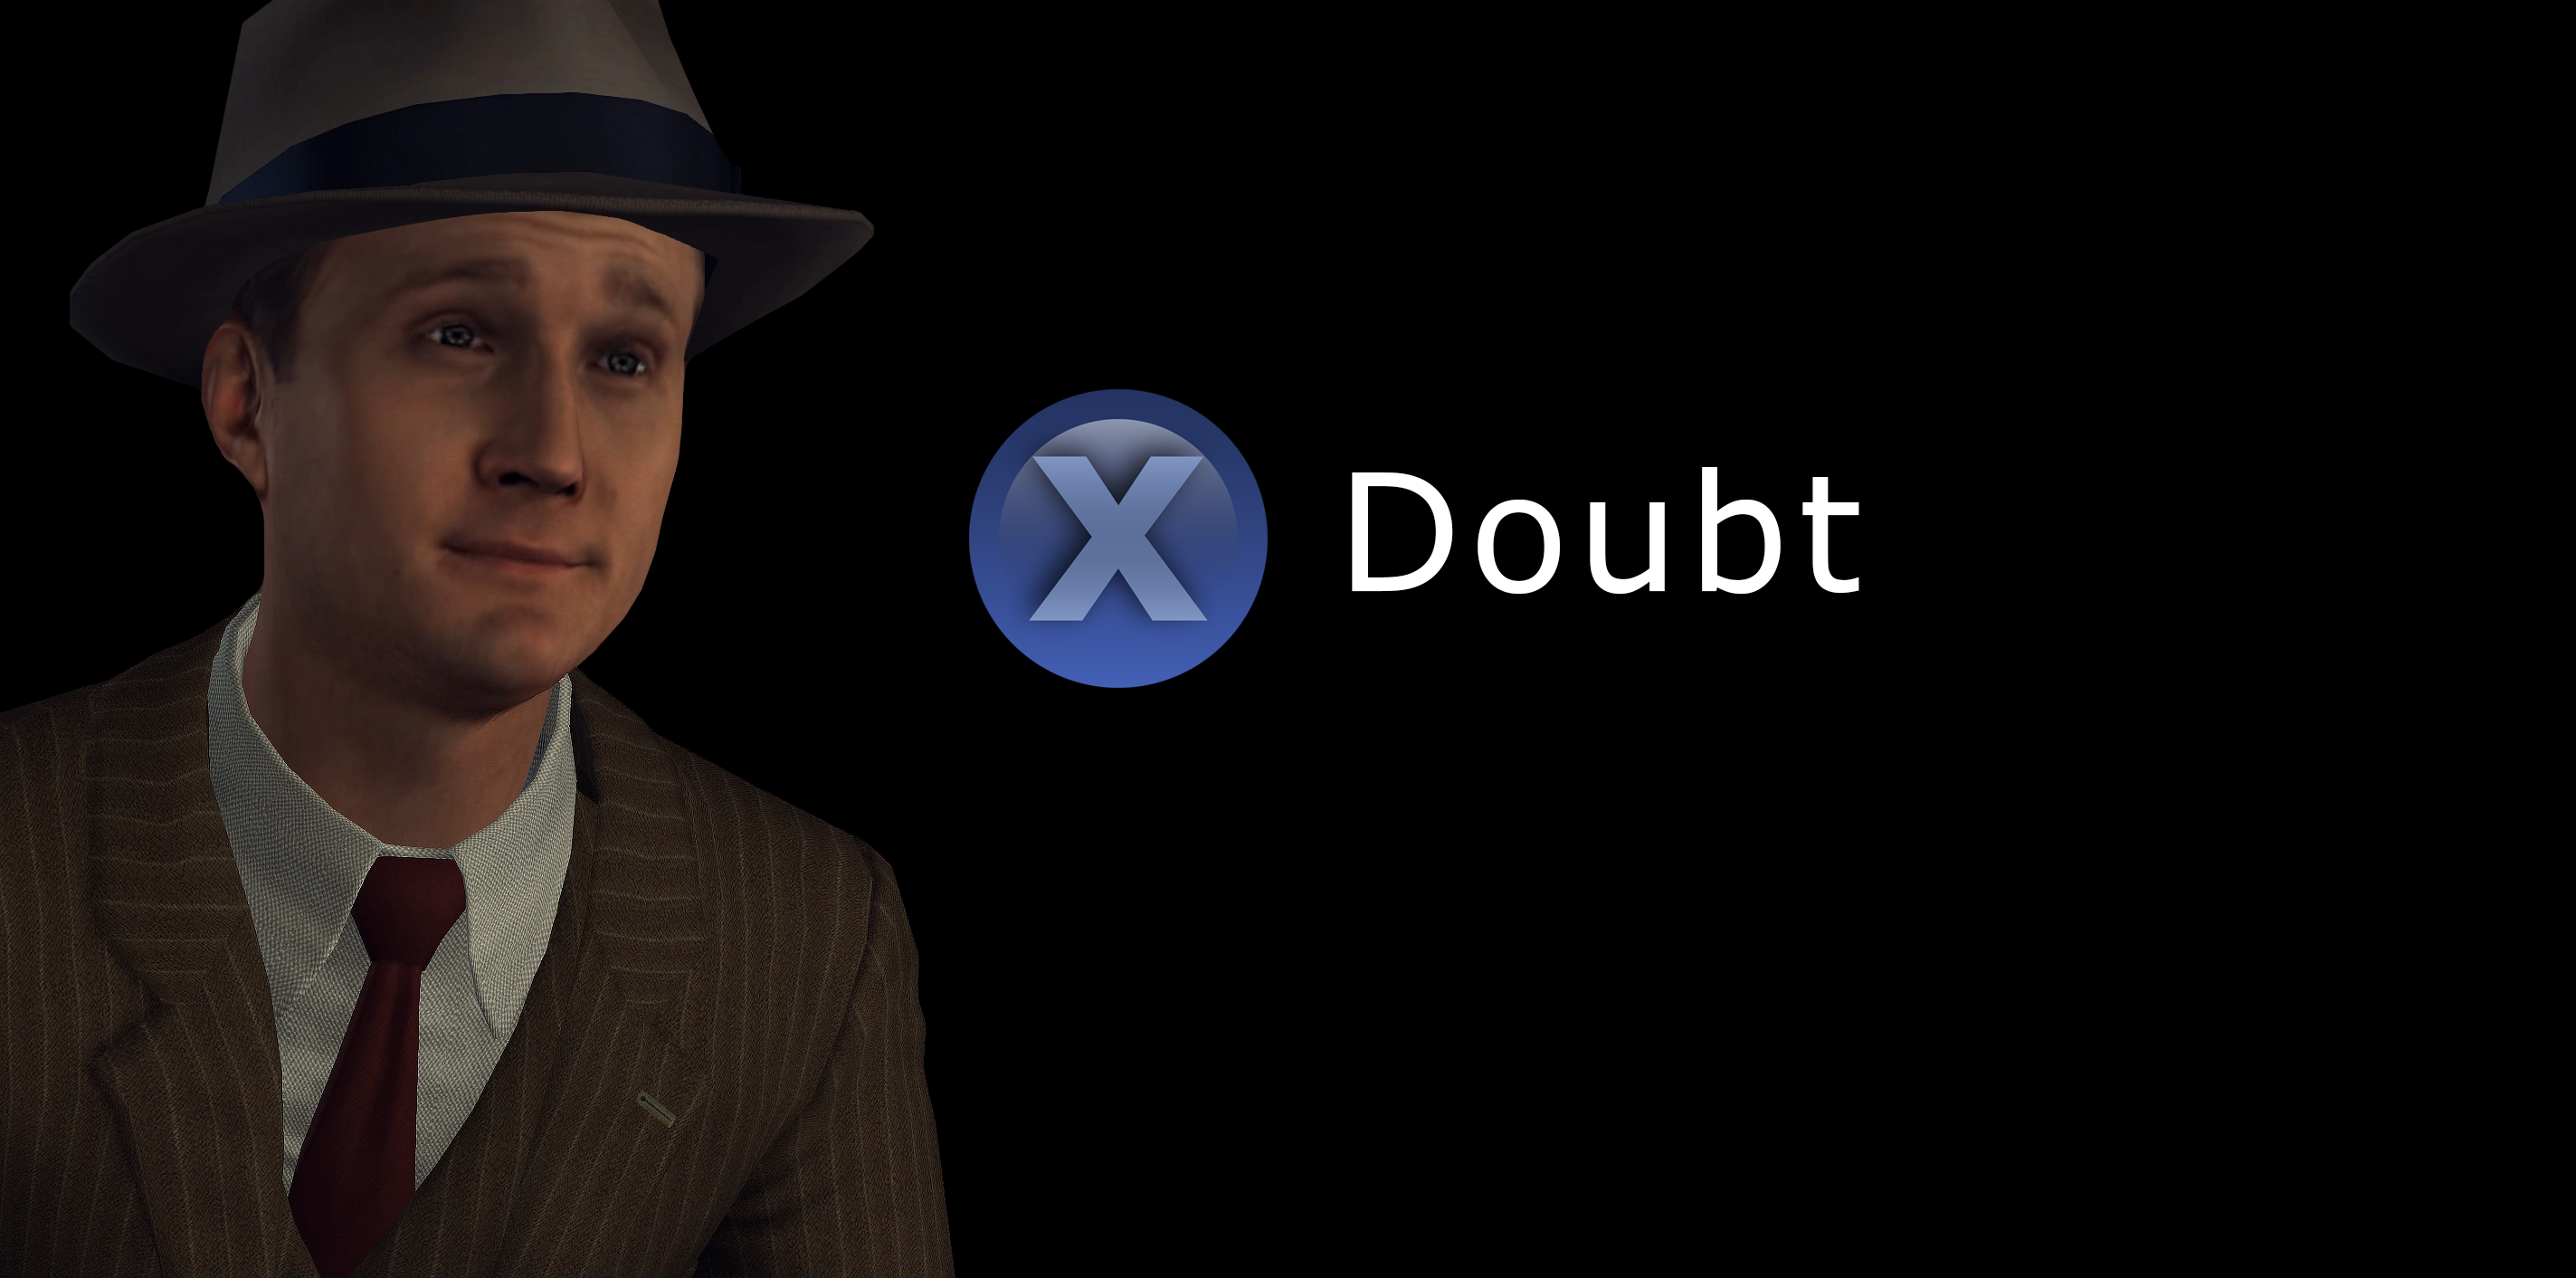 hres-doubt-X.png